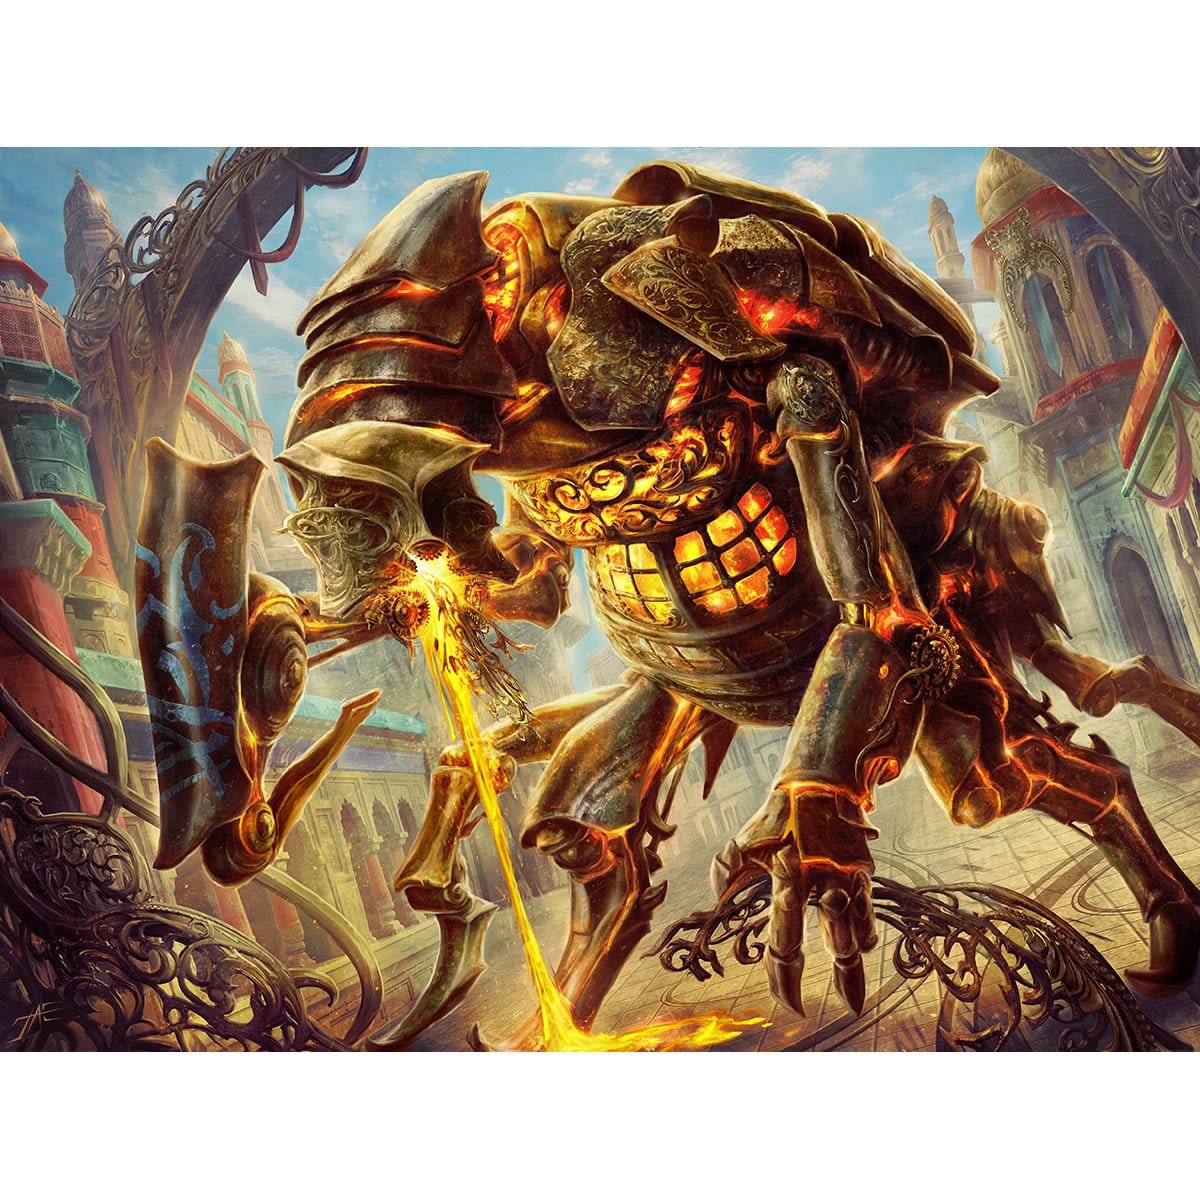 Scrapheap Scrounger Print - Print - Original Magic Art - Accessories for Magic the Gathering and other card games